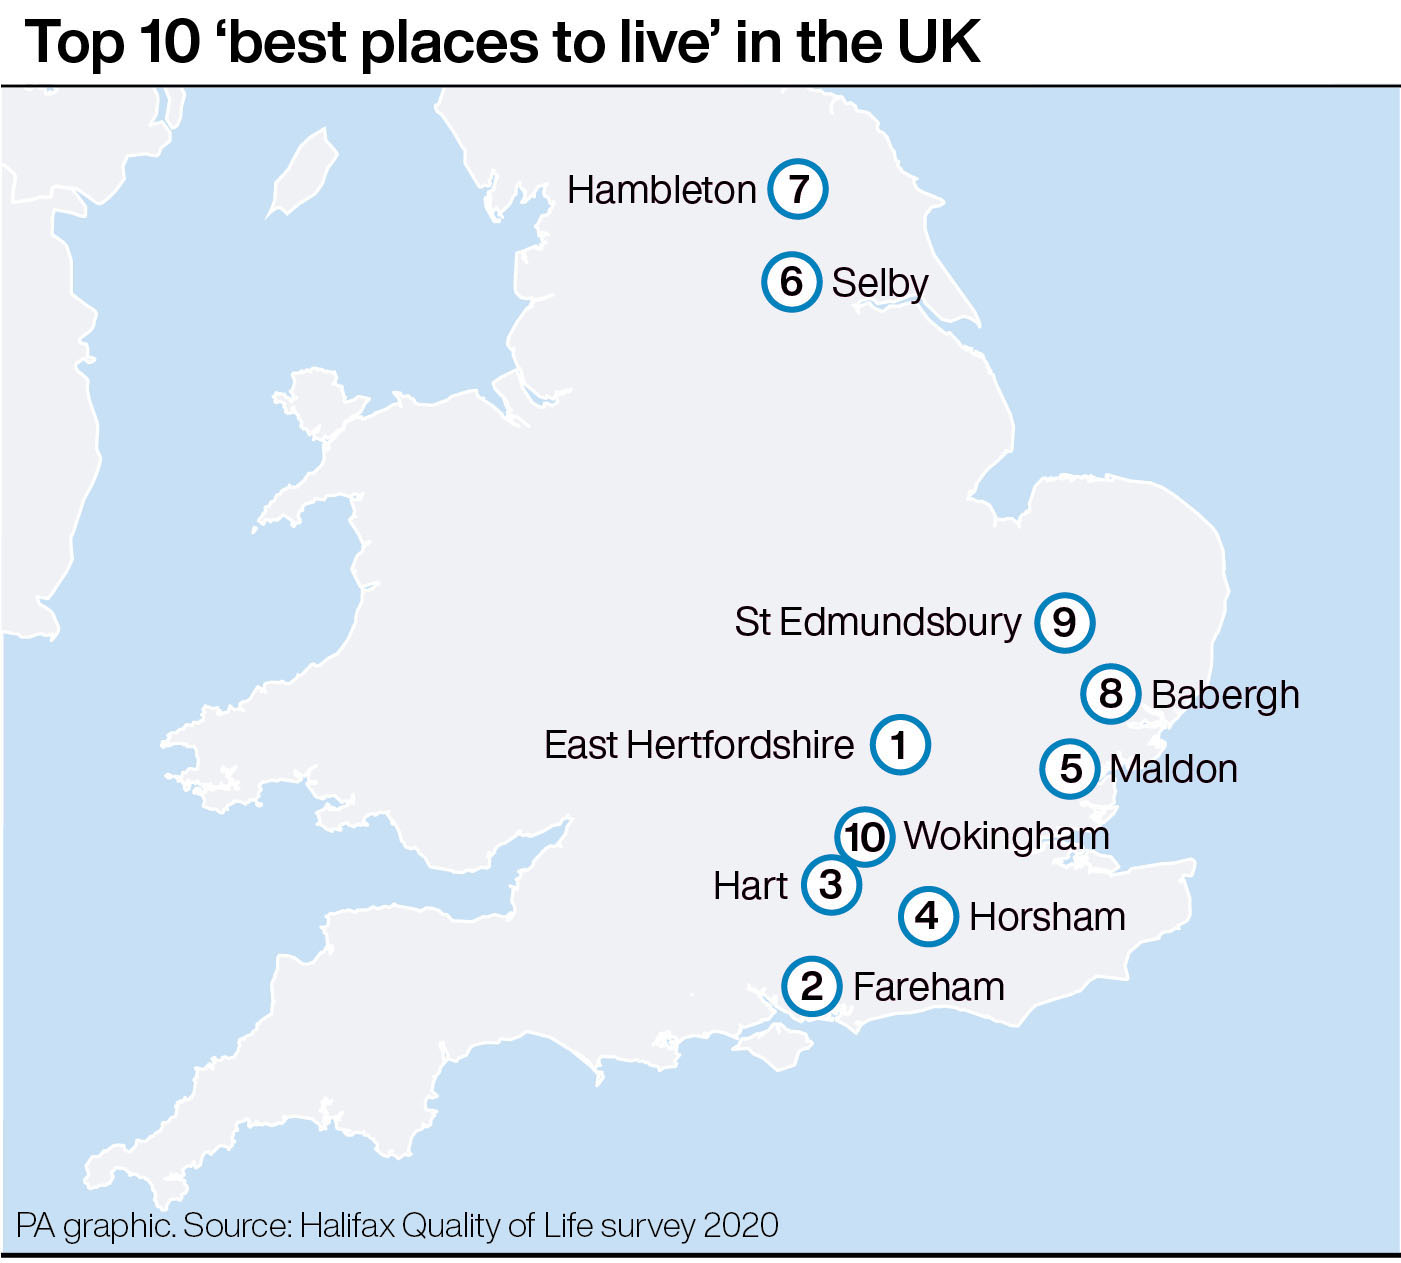 Top 10 'best places to live' in the UK